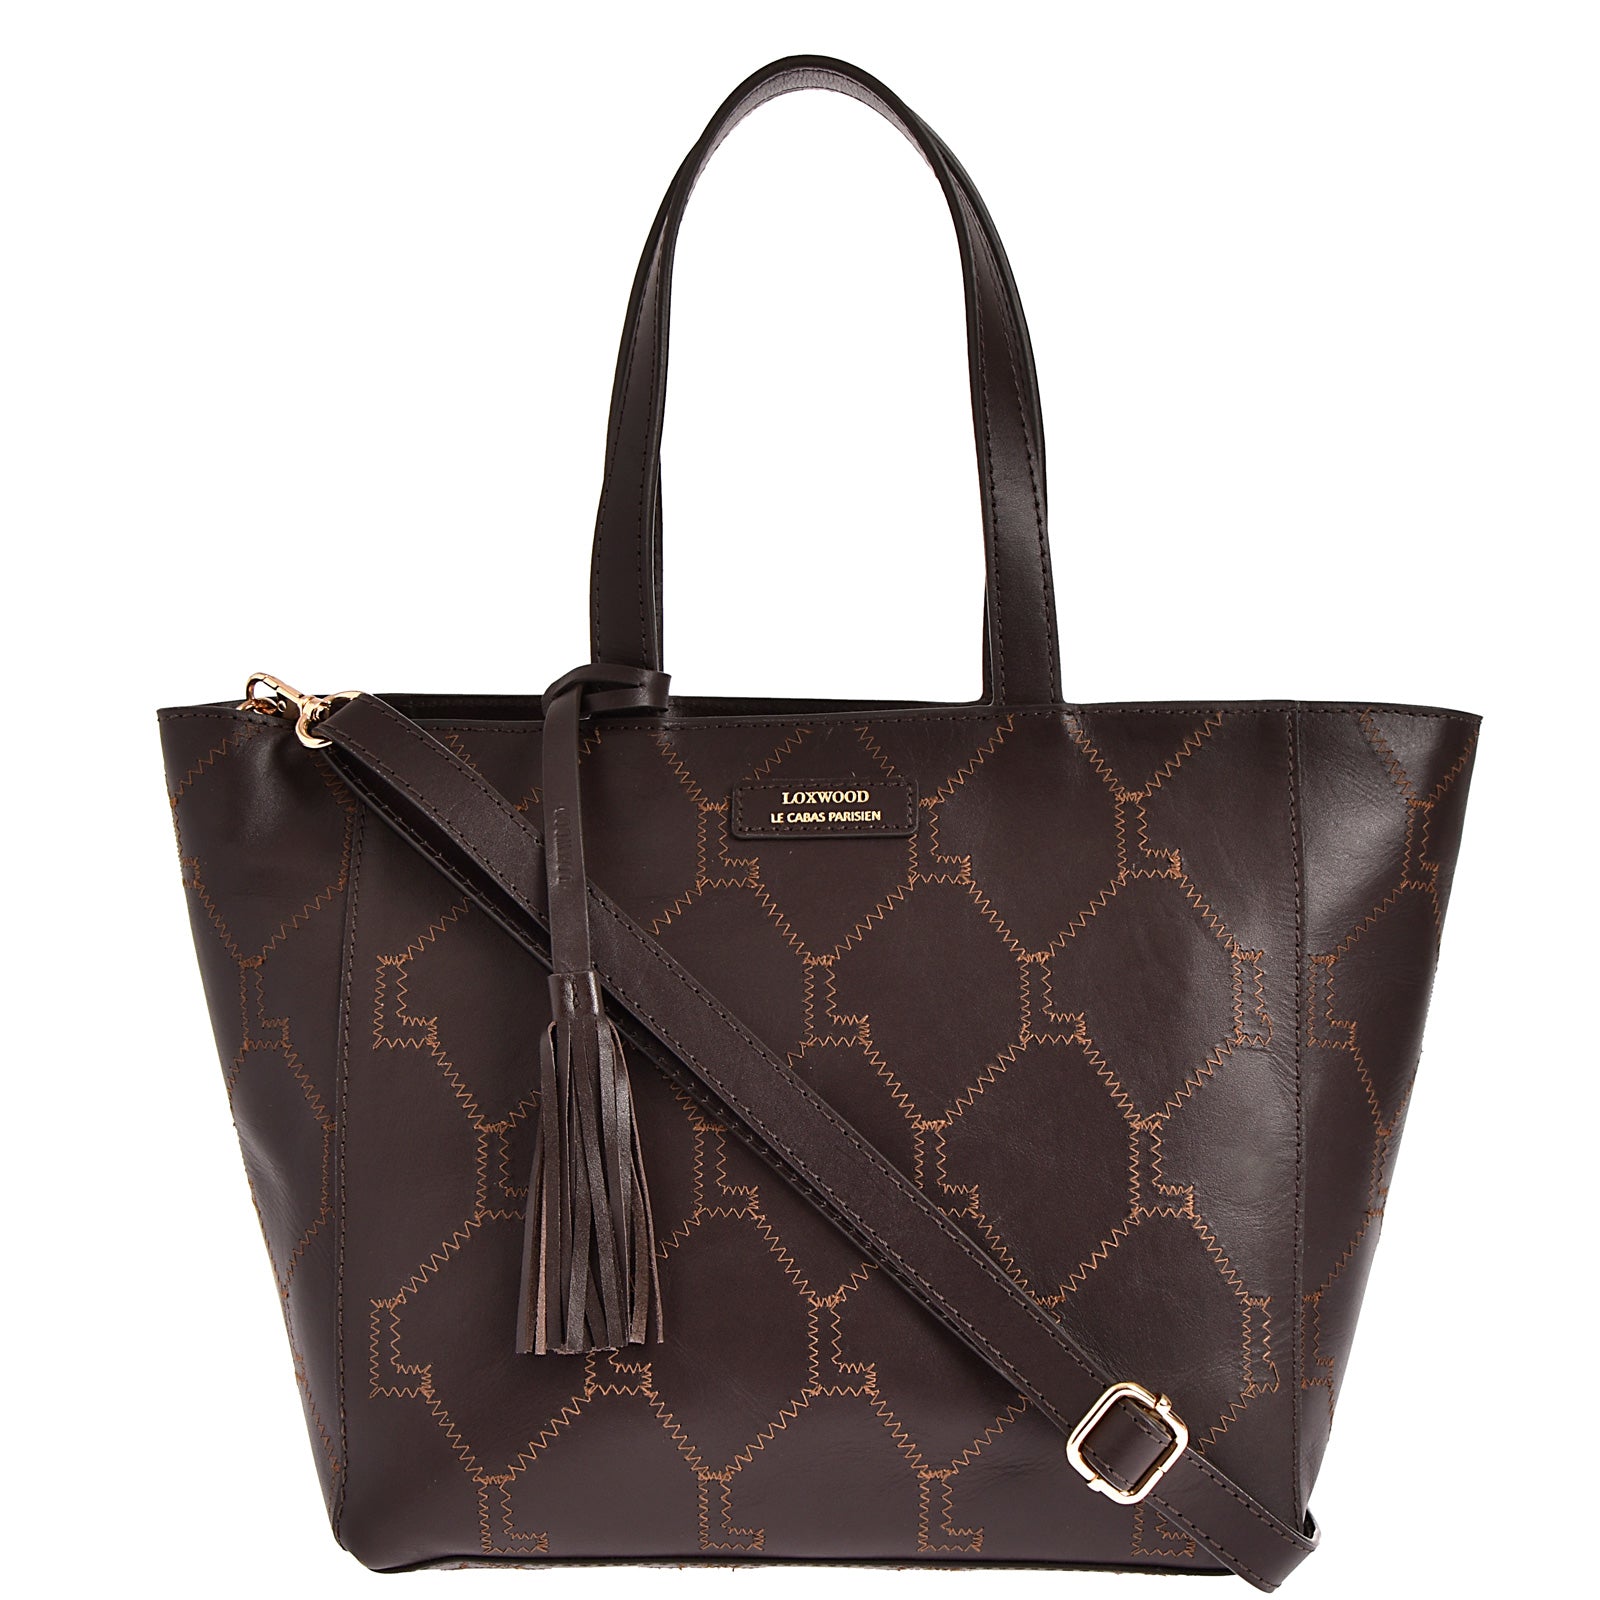 SMALL SIGNATURE ZIP-UP TOTE - EMBROIDERED LEATHER